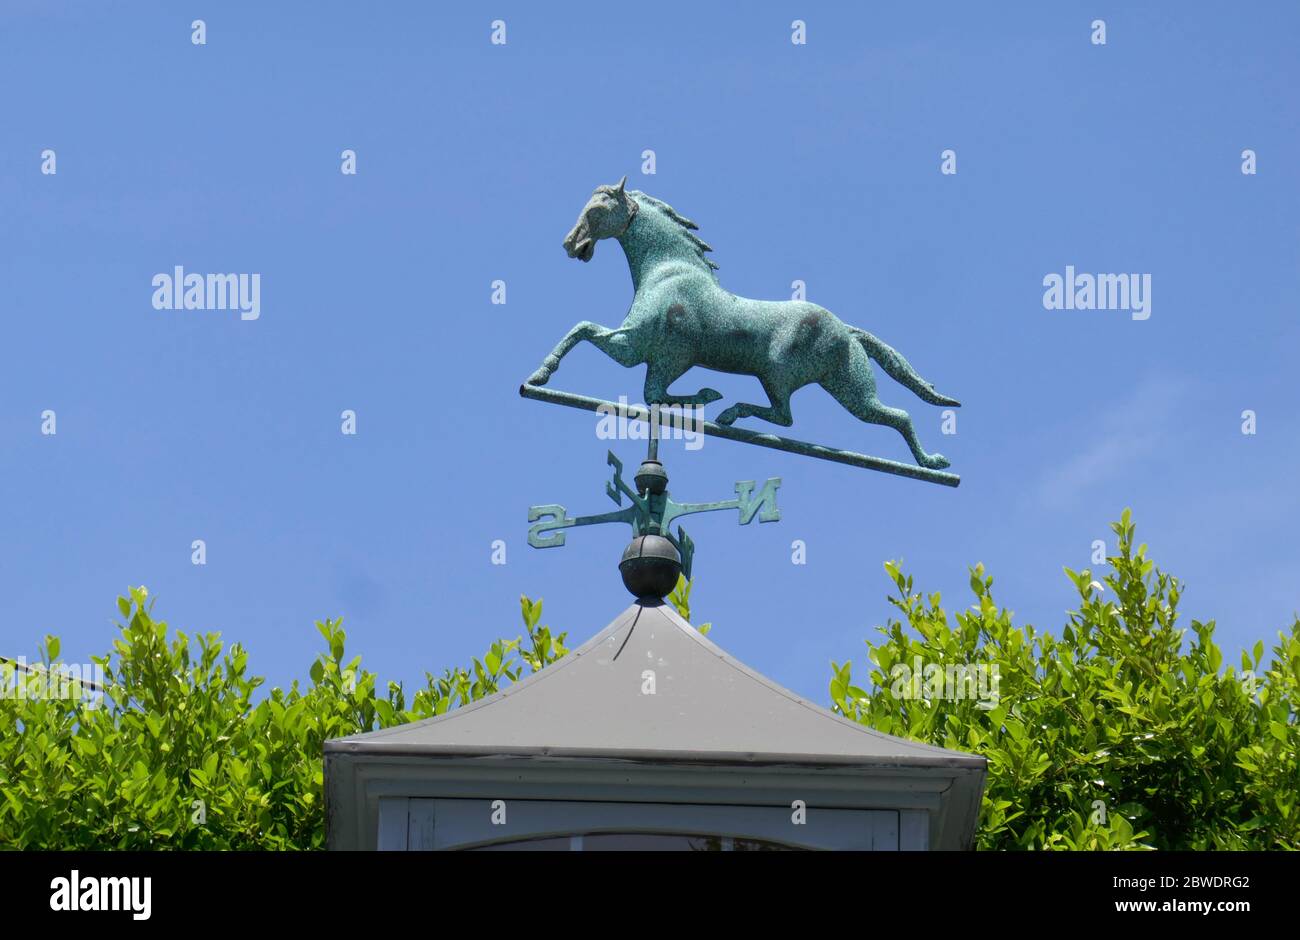 Los Angeles, California, USA 31st May 2020 A general view of atmosphere of a horse weathervane on May 31, 2020 in Los Angeles, California, USA. Photo by Barry King/Alamy Stock Photo Stock Photo